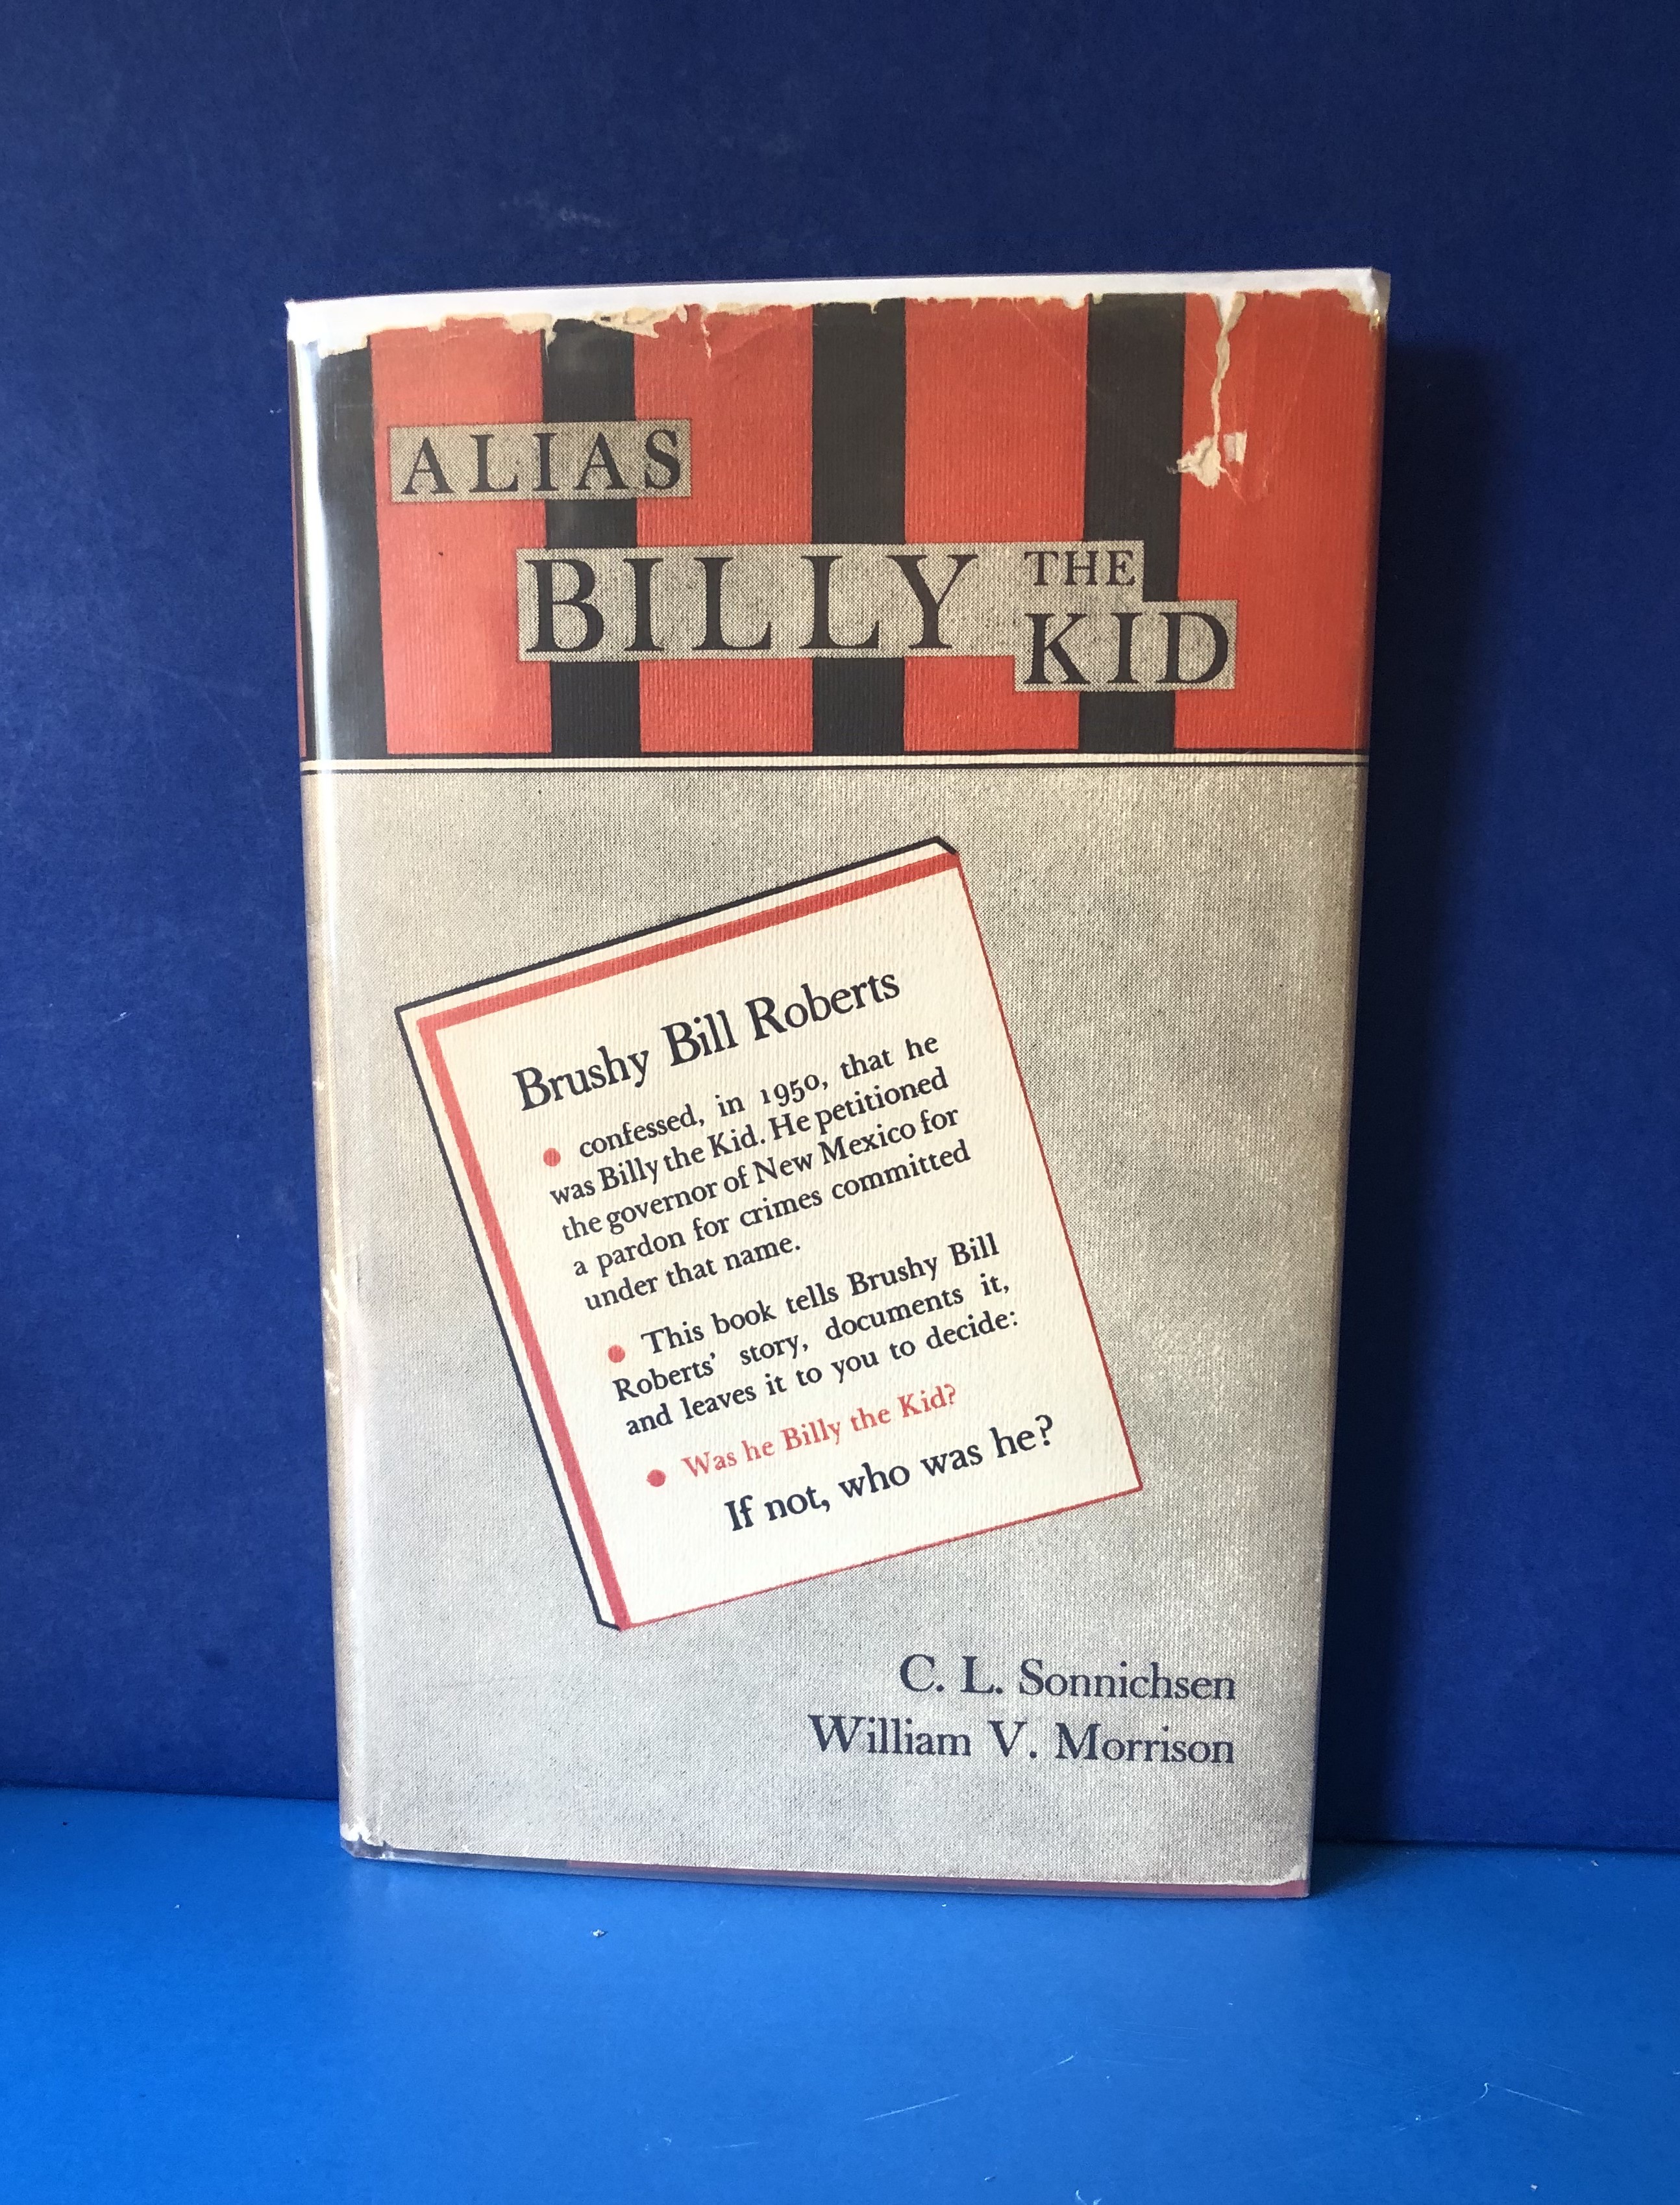 Alias Billy the Kid by C. L. Sonnichsen and William V. Morrison